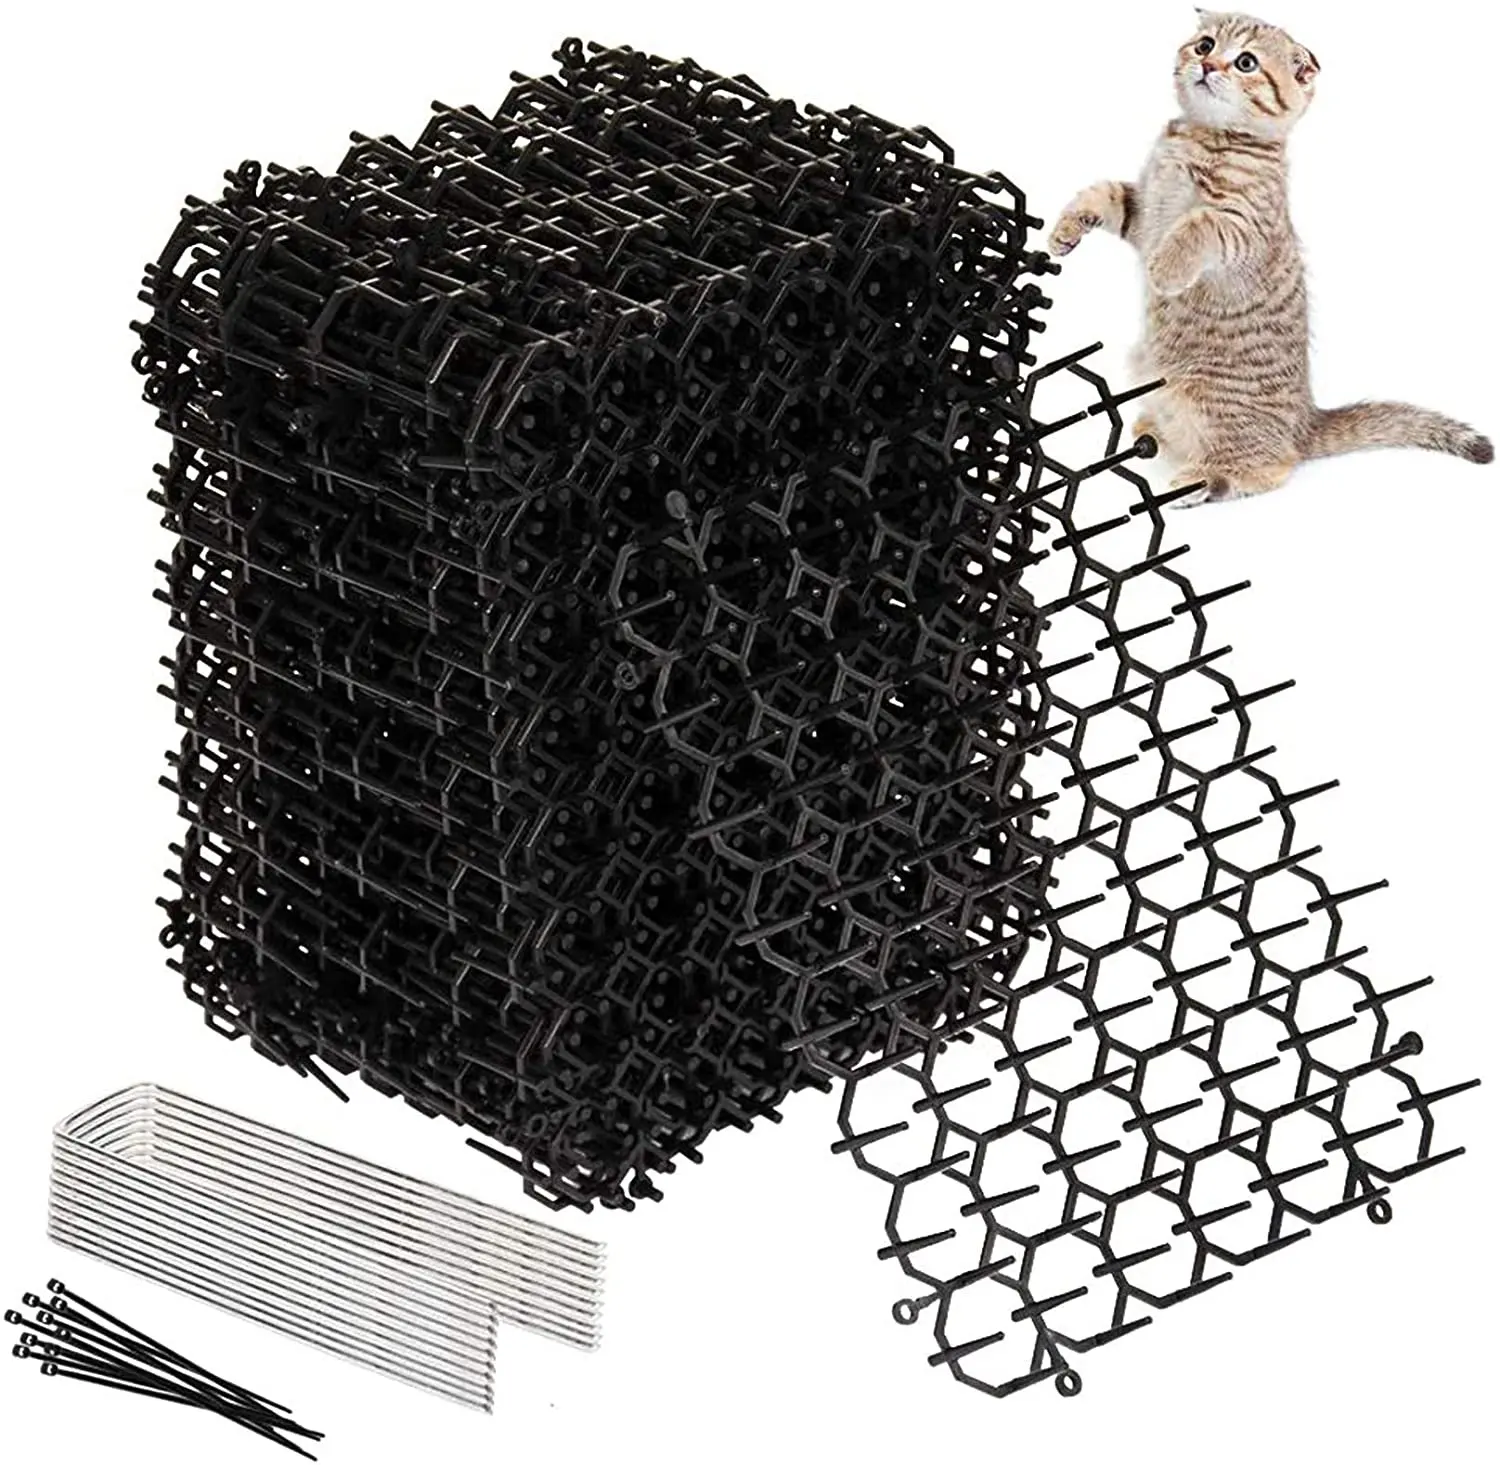 Cheap Cat scat mat Anti-Cats Network Digging Stopper Prickle Strip Home Pest Repellent